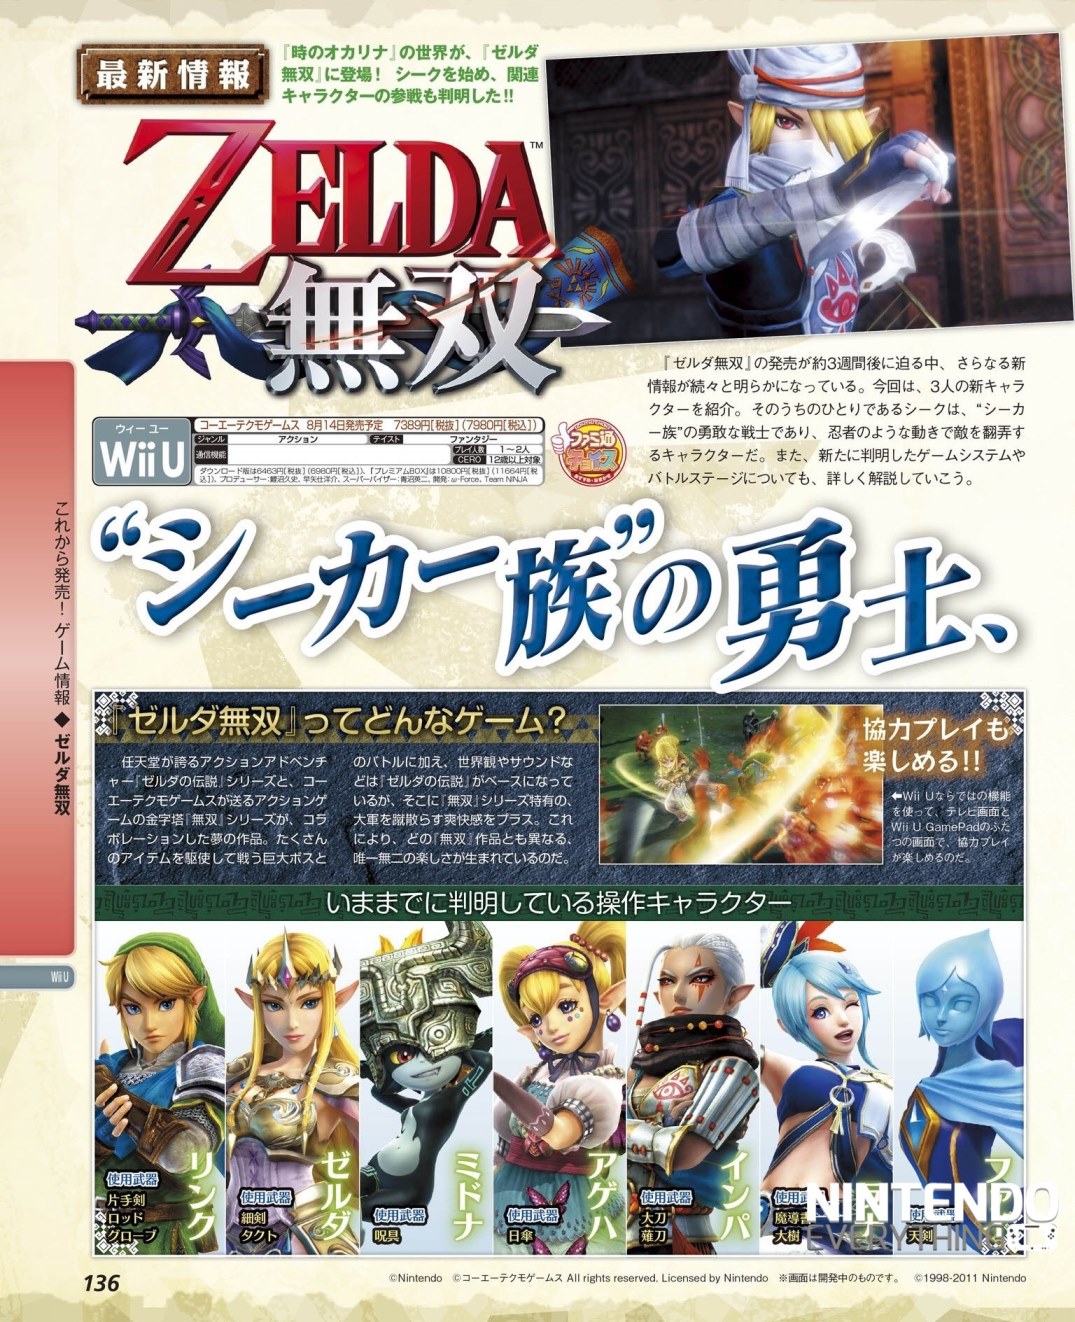 New Hyrule Warriors Famitsu Scans Show New Stages And Characters